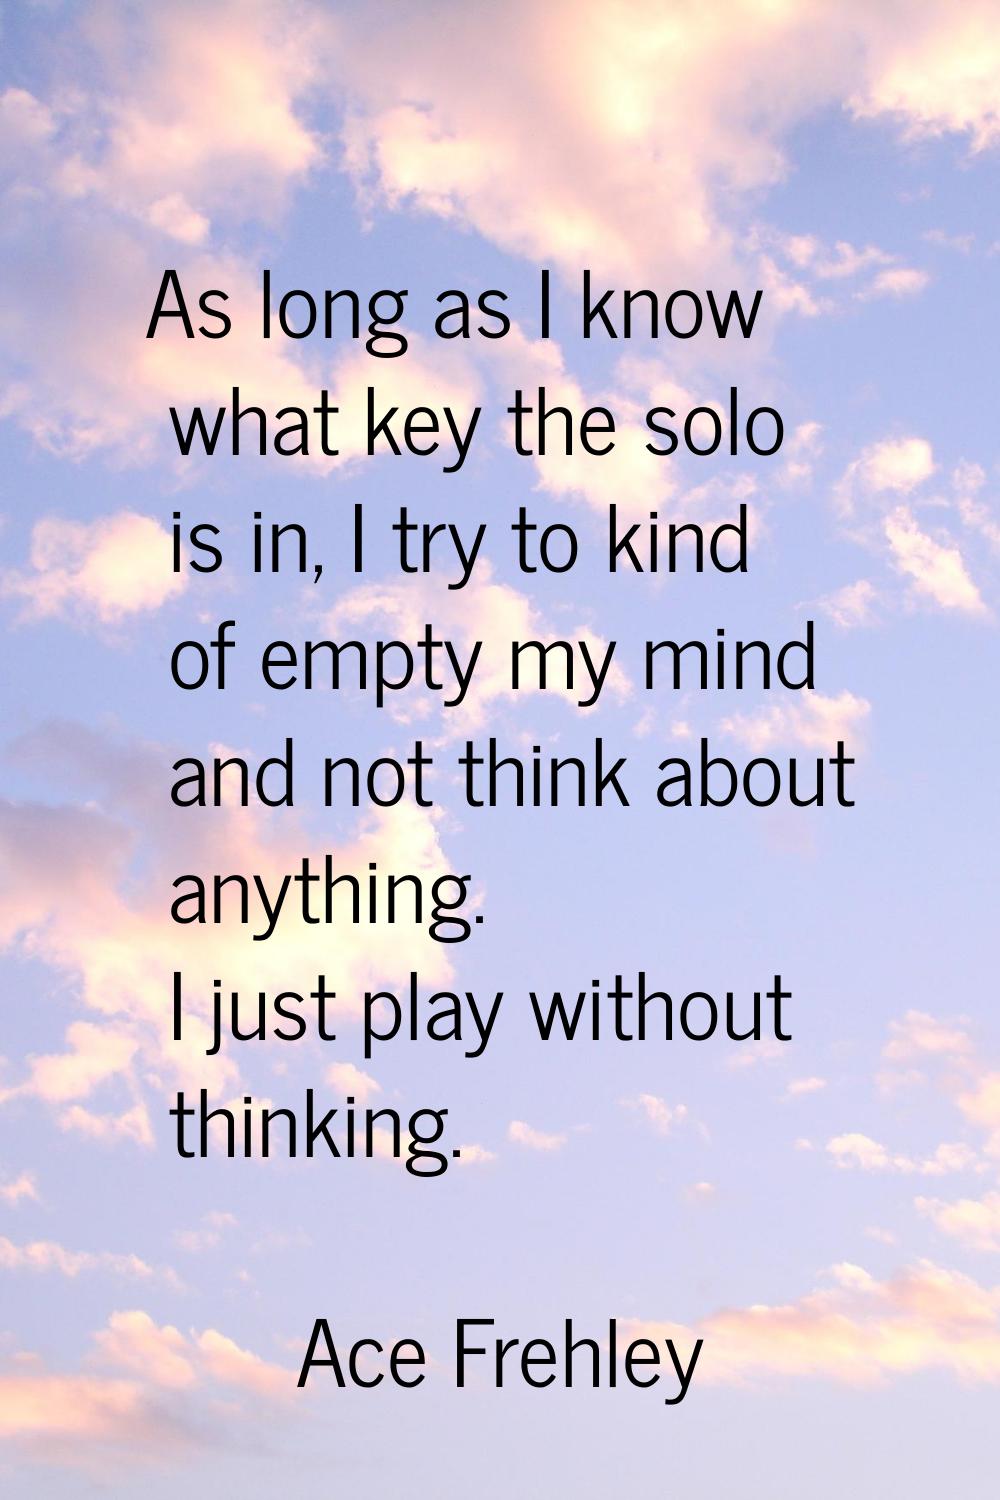 As long as I know what key the solo is in, I try to kind of empty my mind and not think about anyth